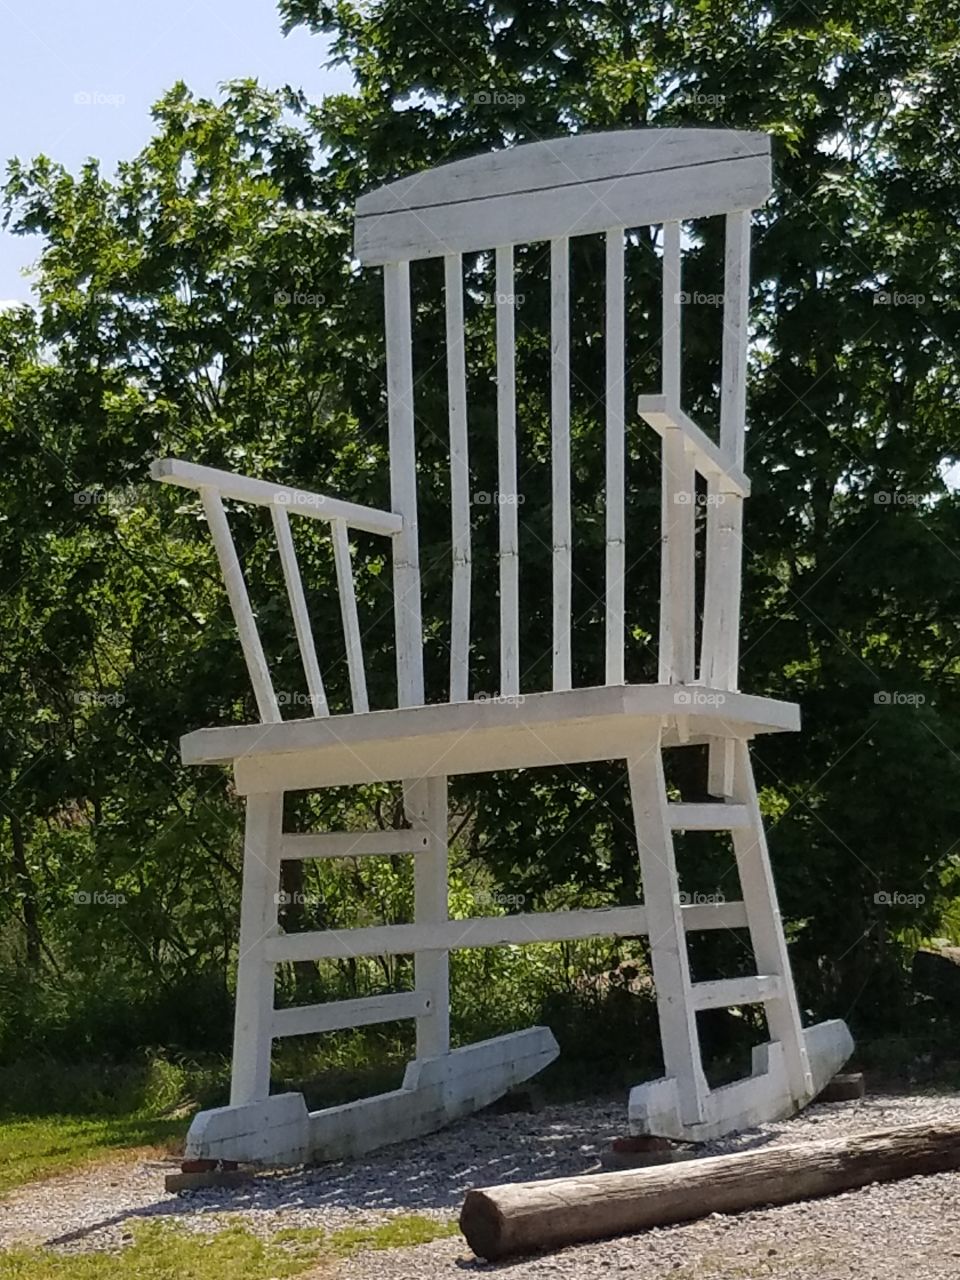 Roadside Attraction: 20 foot rocking chair